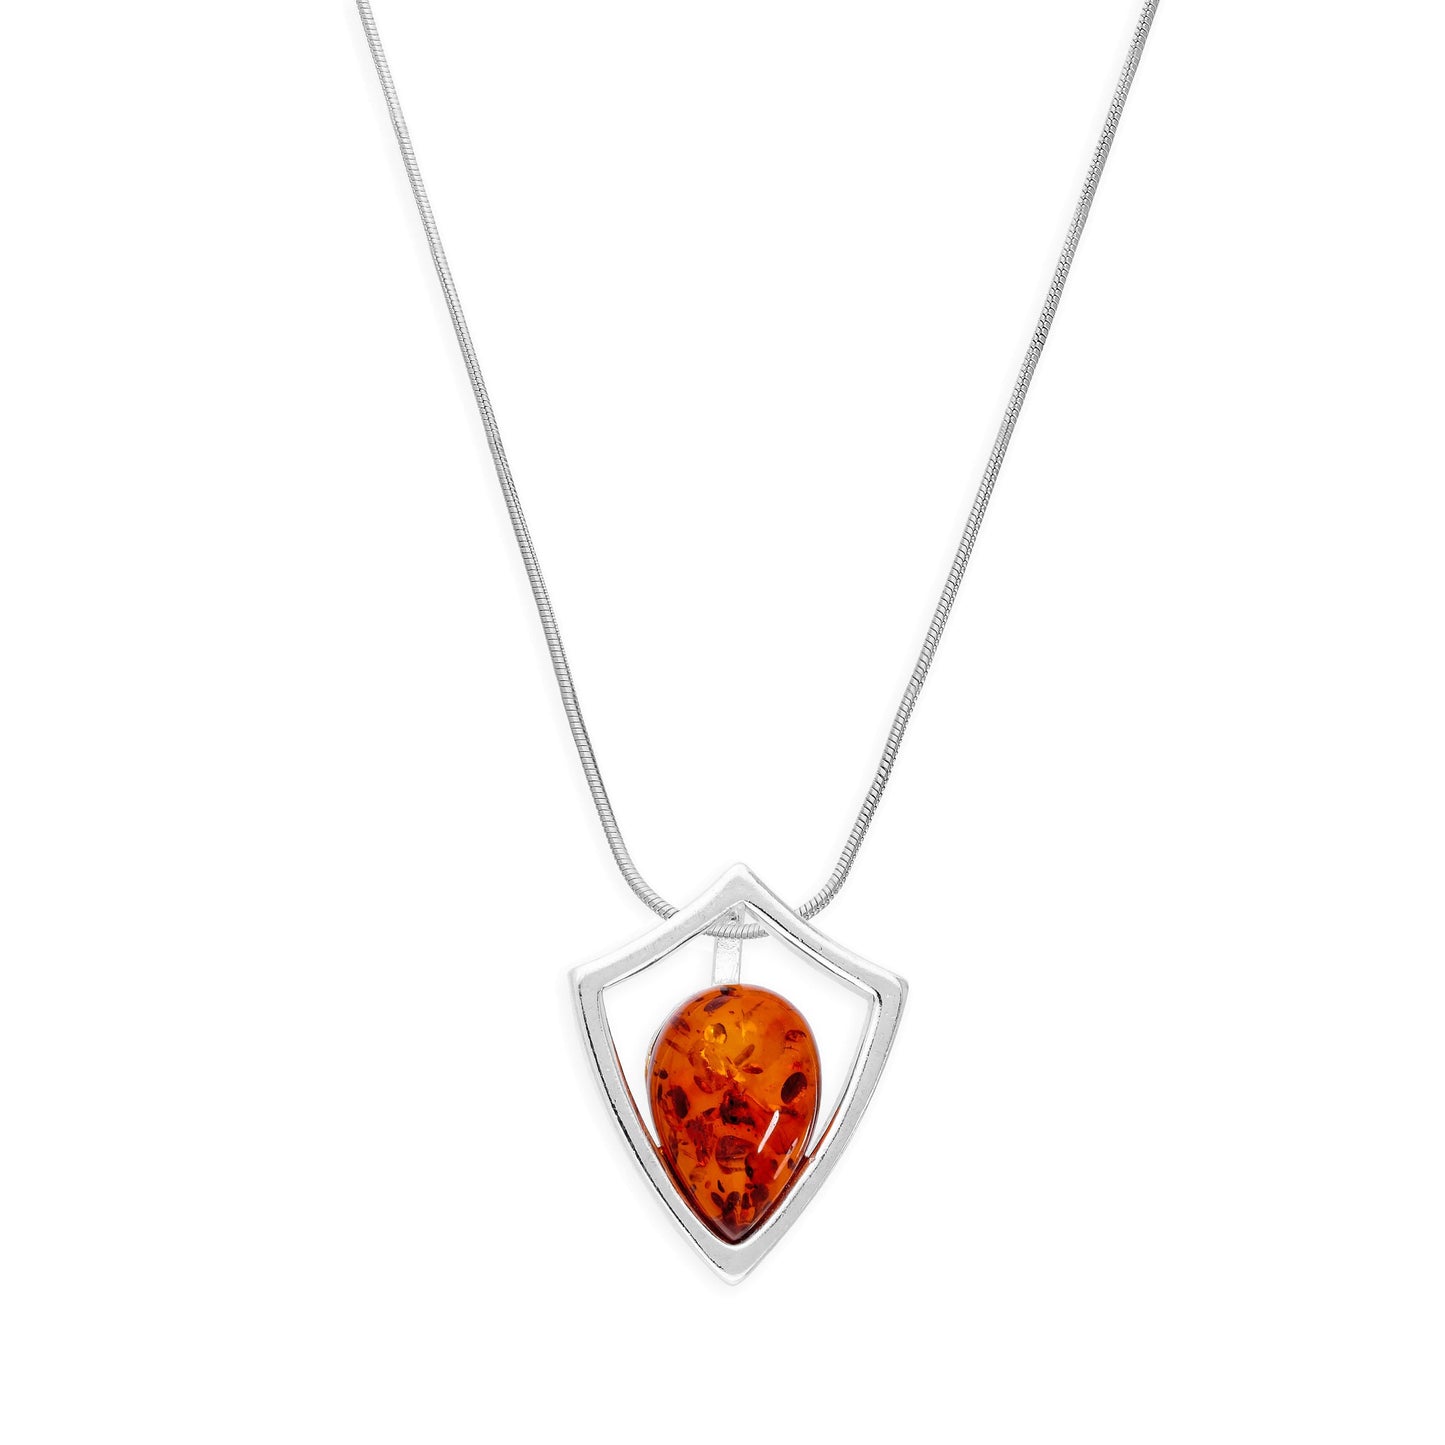 Sterling Silver & Baltic Amber Shield Outline Pendant Necklace 14 - 22 Inches